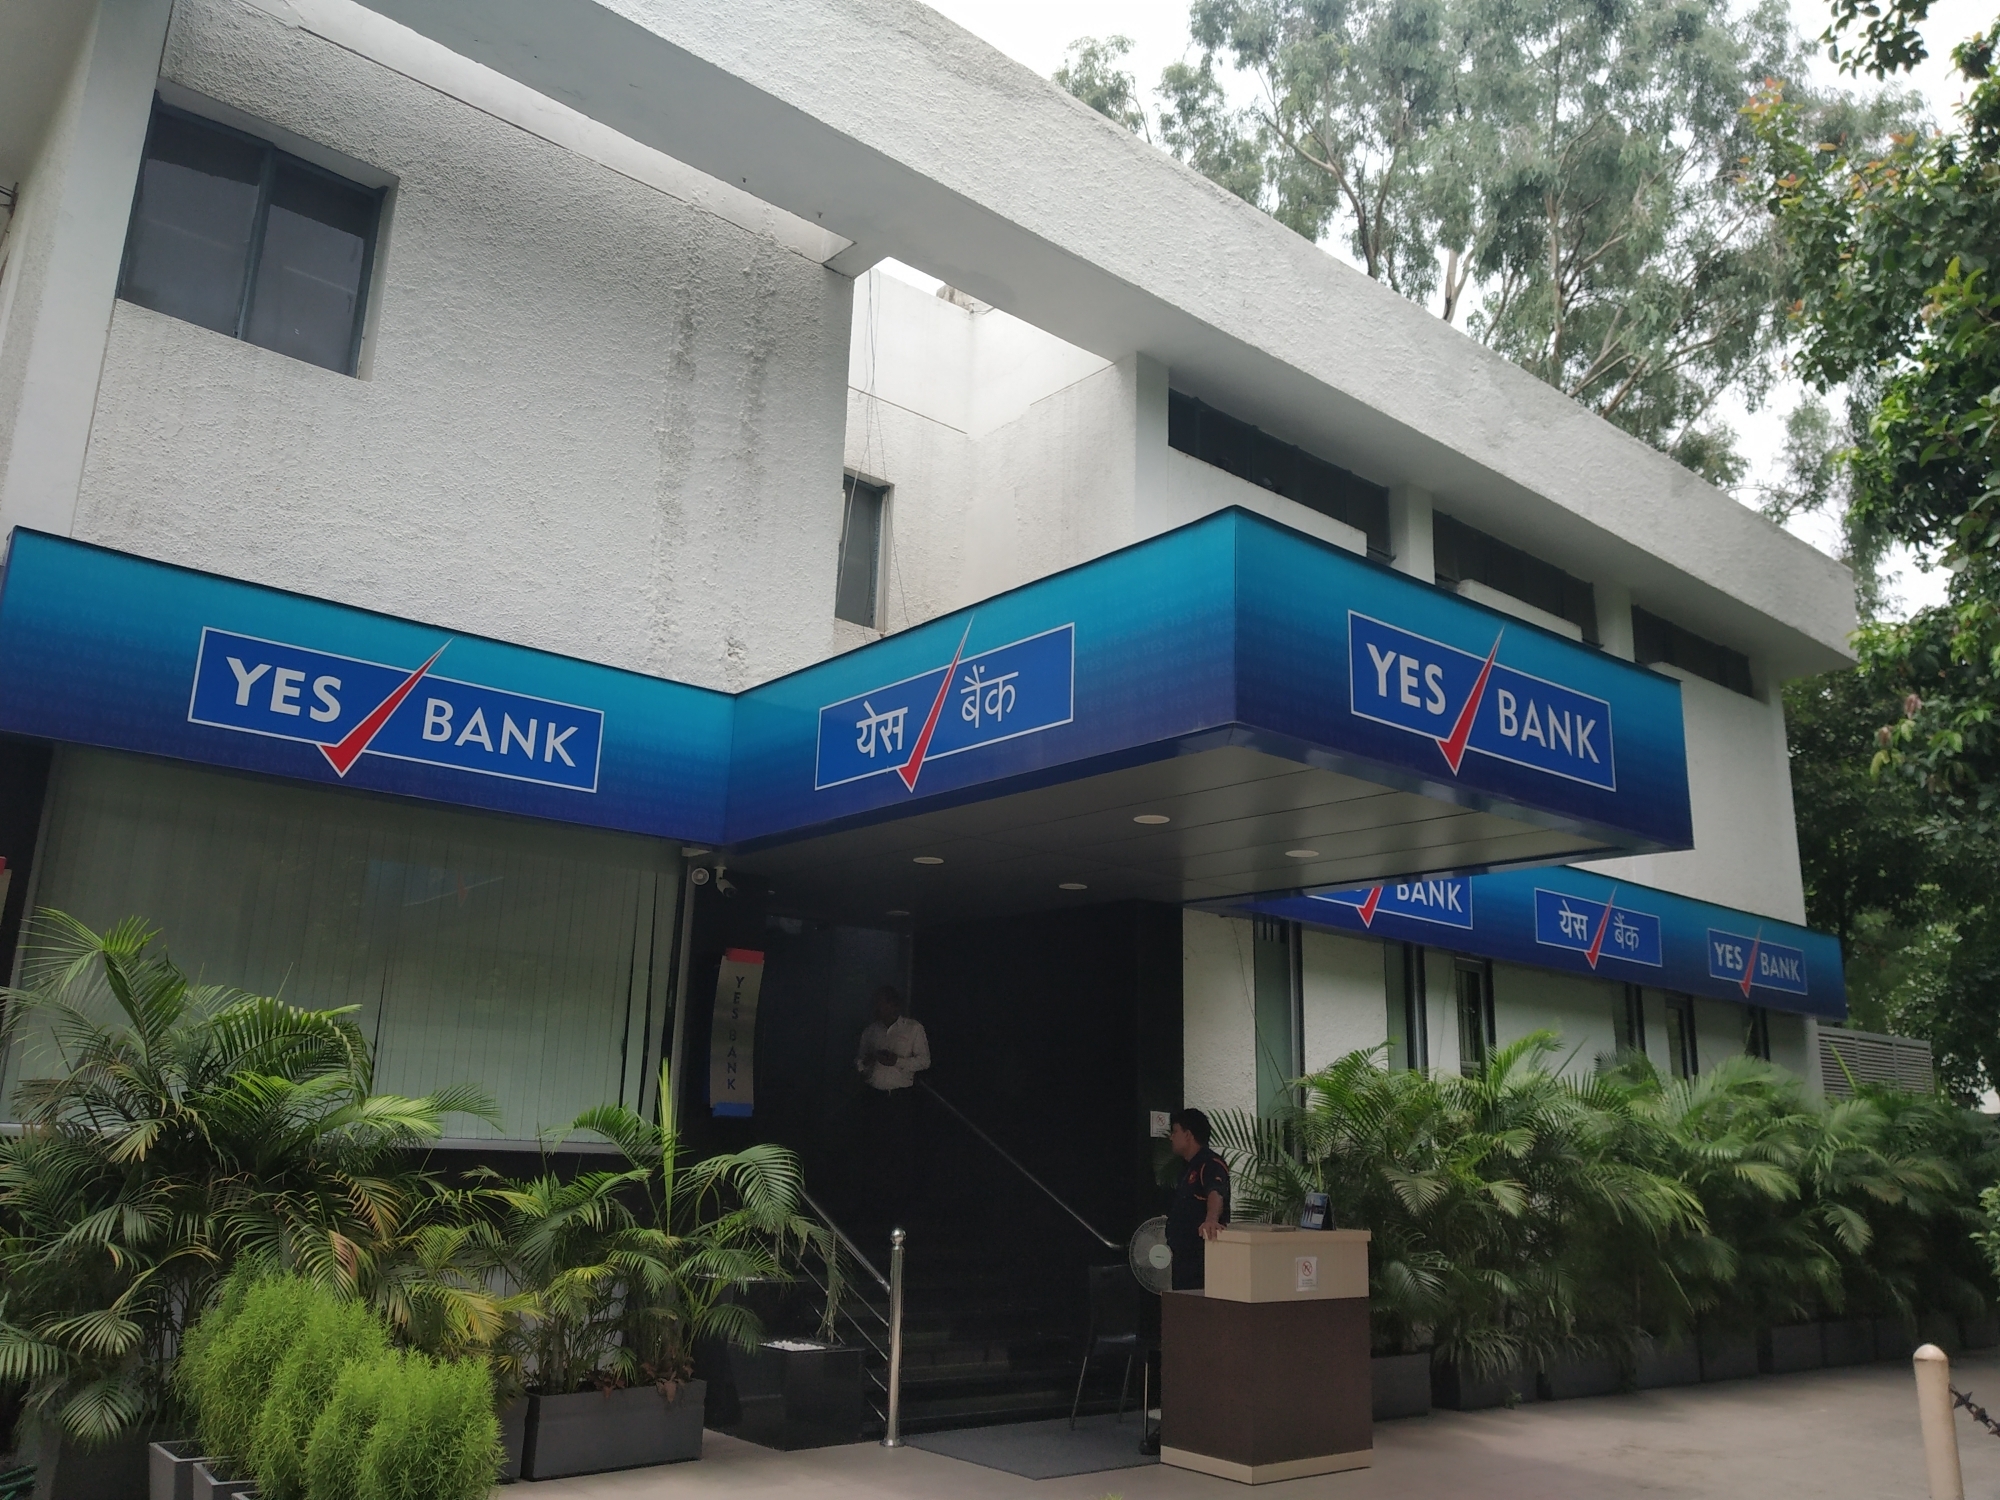 CCI clears acquisition of 10% stake in Yes Bank by CA Basque Investments